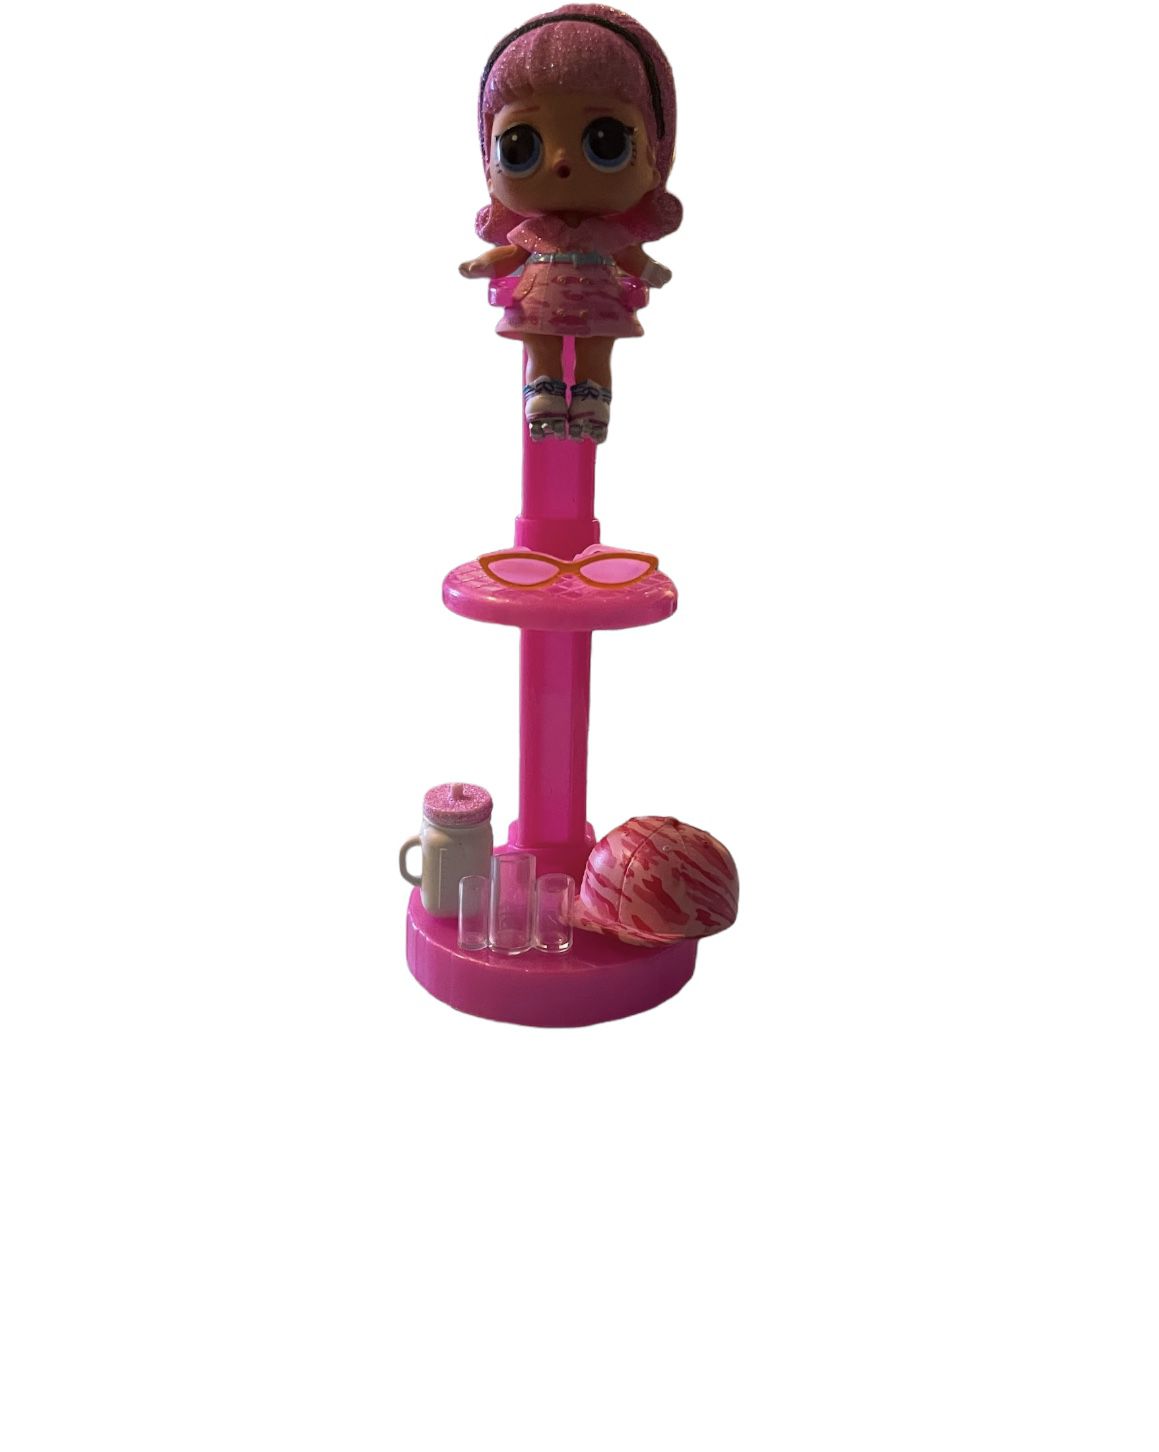 LOL Surprise QT CUTIE BABY Doll With Pink Hair Comes In Bundle With Accessories